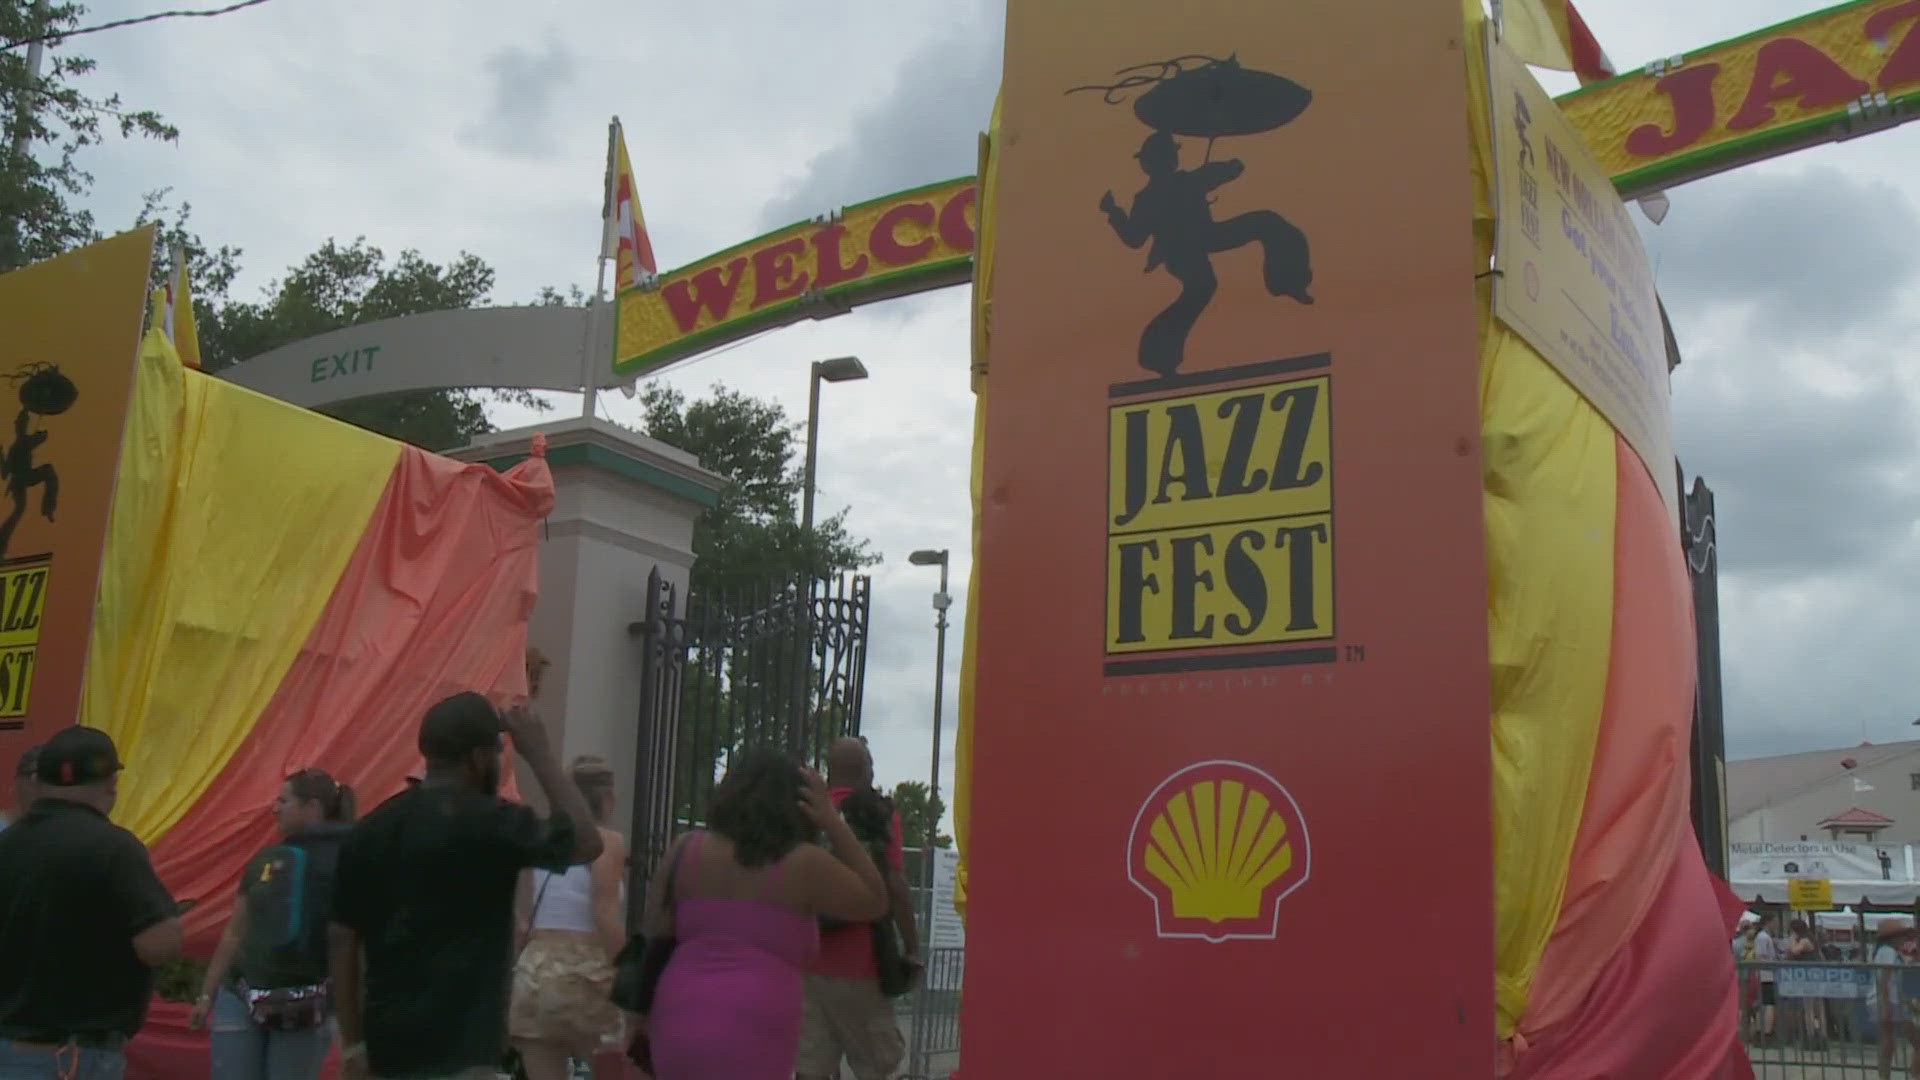 Trombone Shorty, Bonnie Raitt, and Earth Wind and Fire will close out the fest